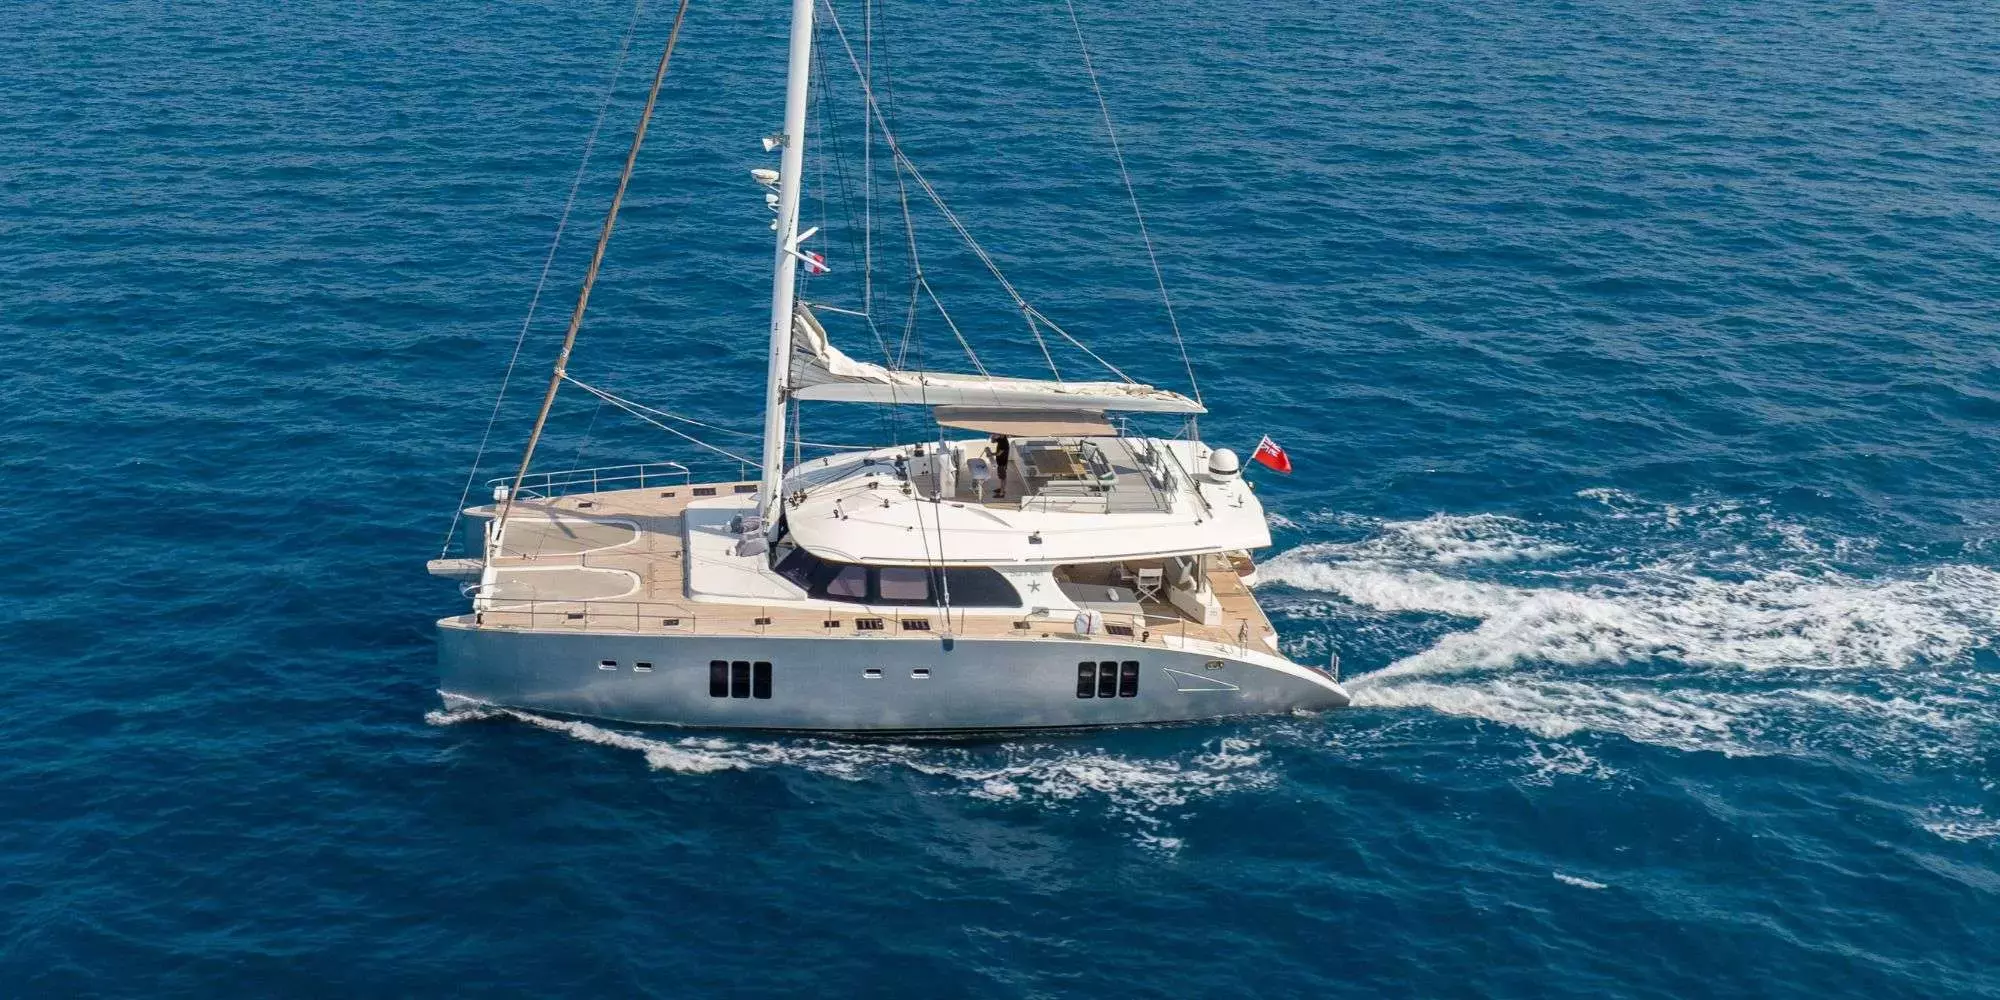 Seazen II by Sunreef Yachts - Special Offer for a private Luxury Catamaran Rental in St Tropez with a crew